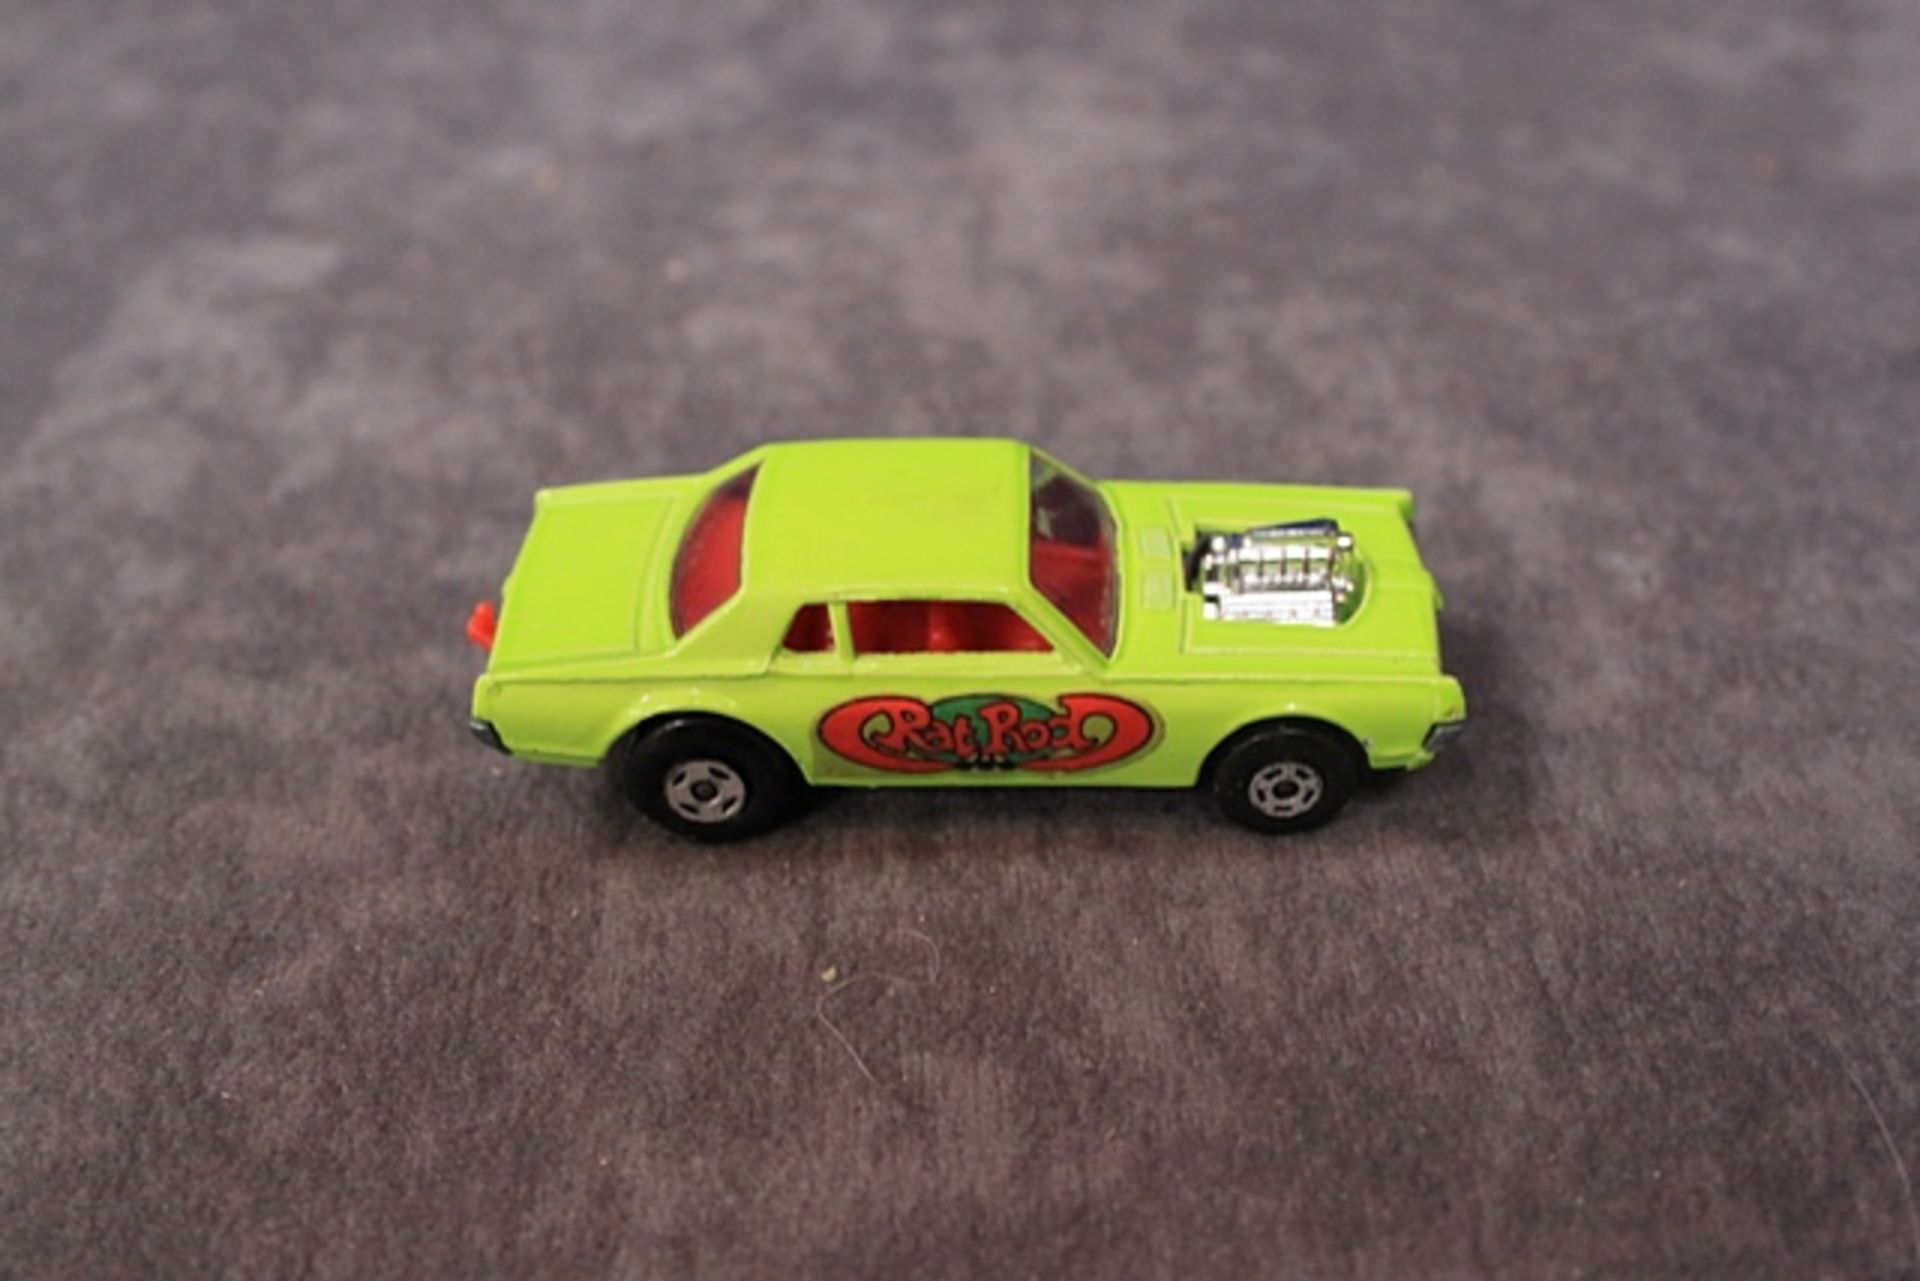 Mint Matchbox Superfast Diecast # 62 Rat Rod Dragster In Firm Box - Image 2 of 3